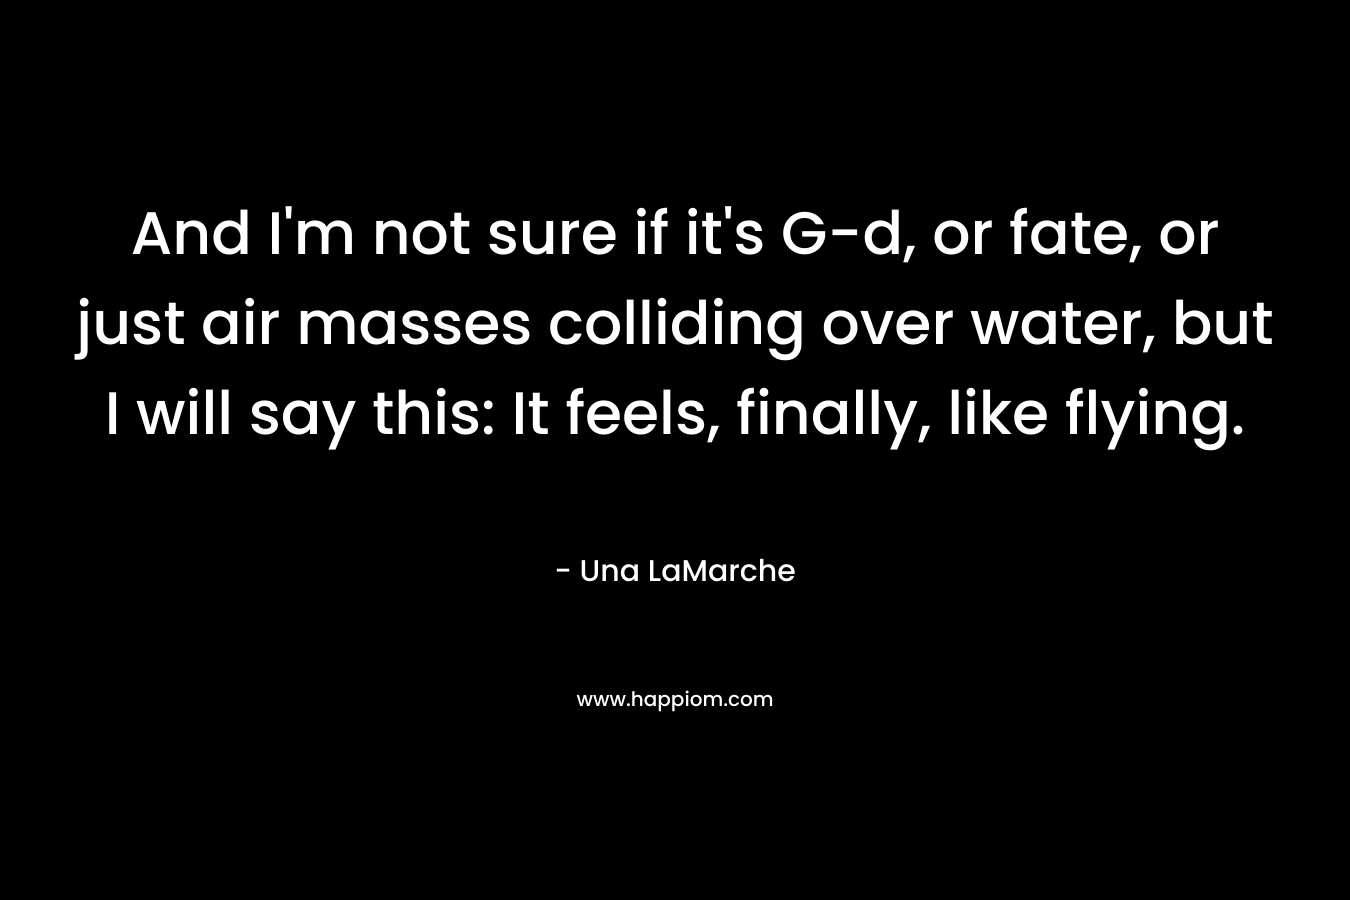 And I’m not sure if it’s G-d, or fate, or just air masses colliding over water, but I will say this: It feels, finally, like flying. – Una LaMarche